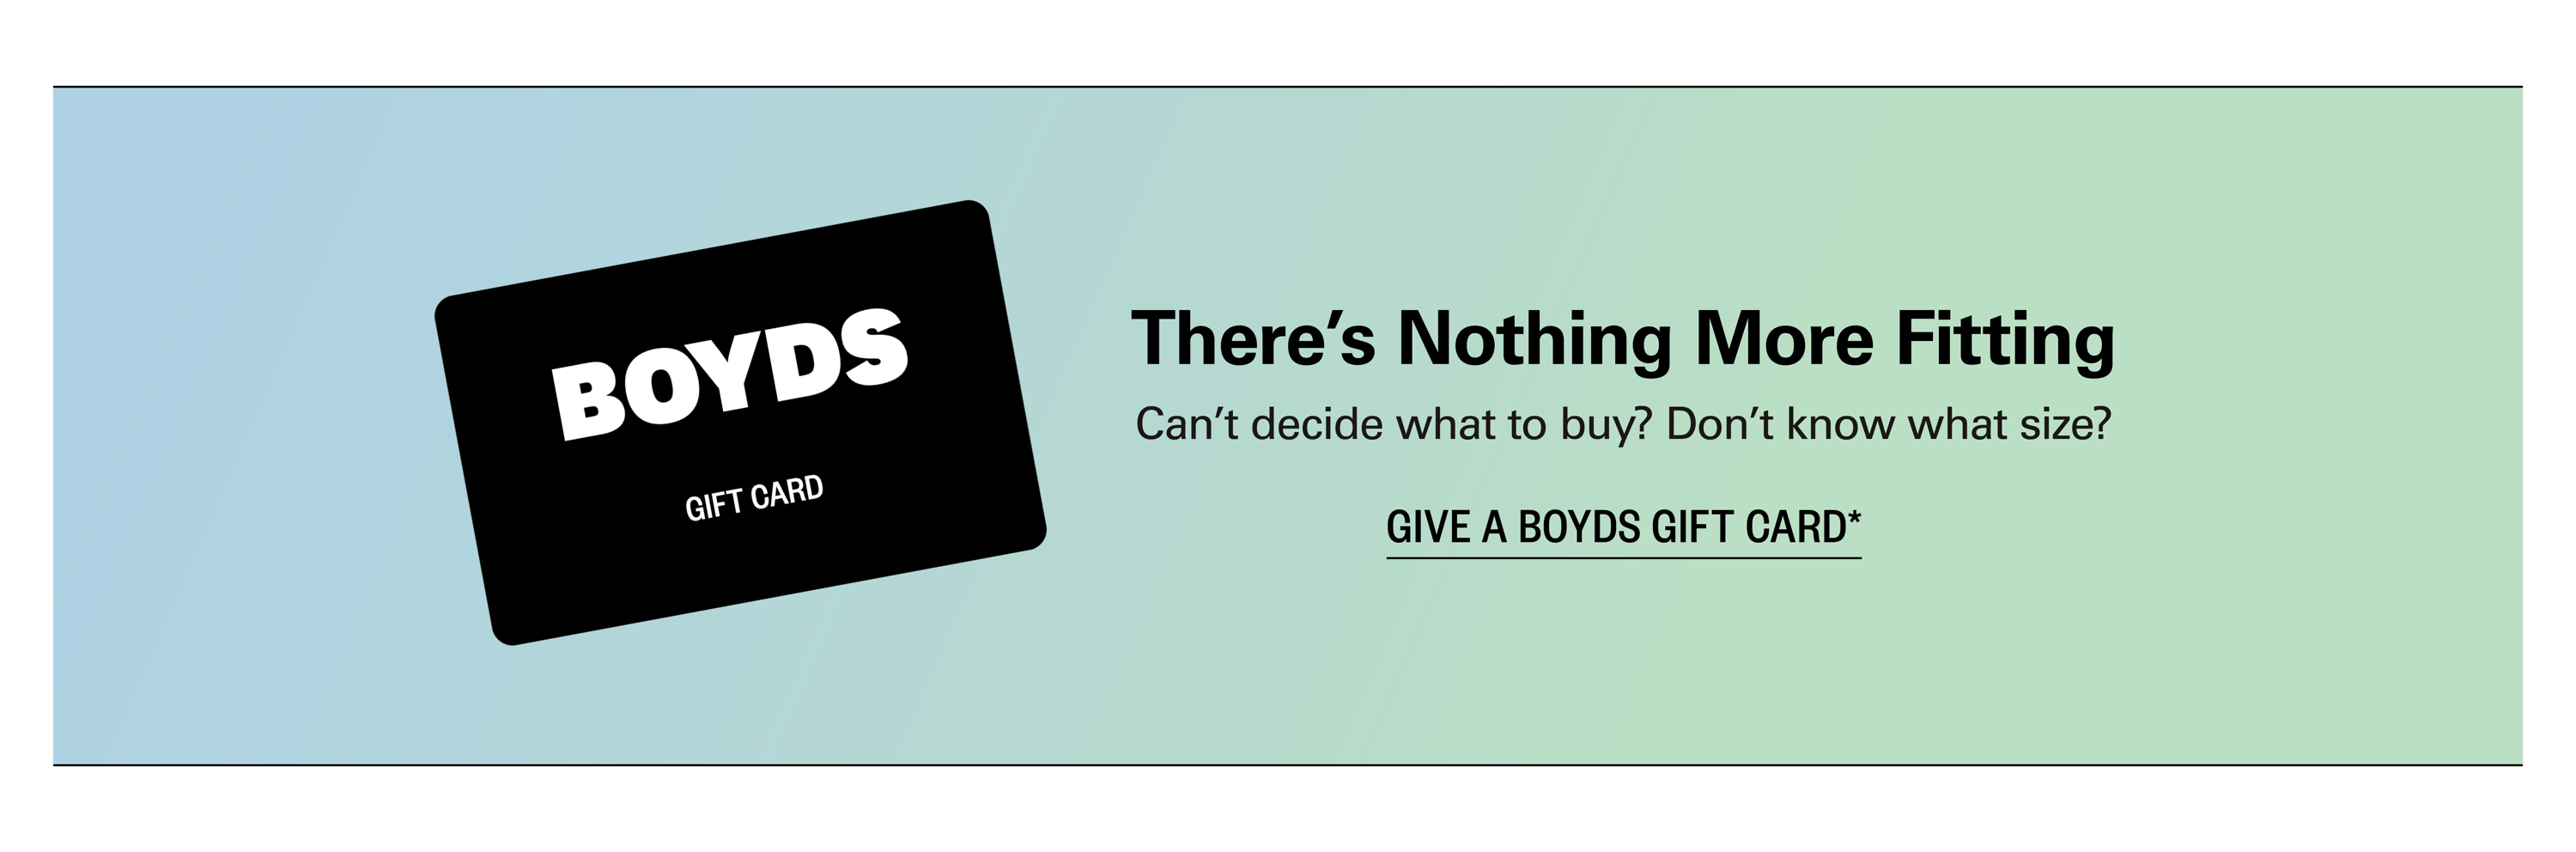 Boyds Gift Card - There's Nothing More Fiting